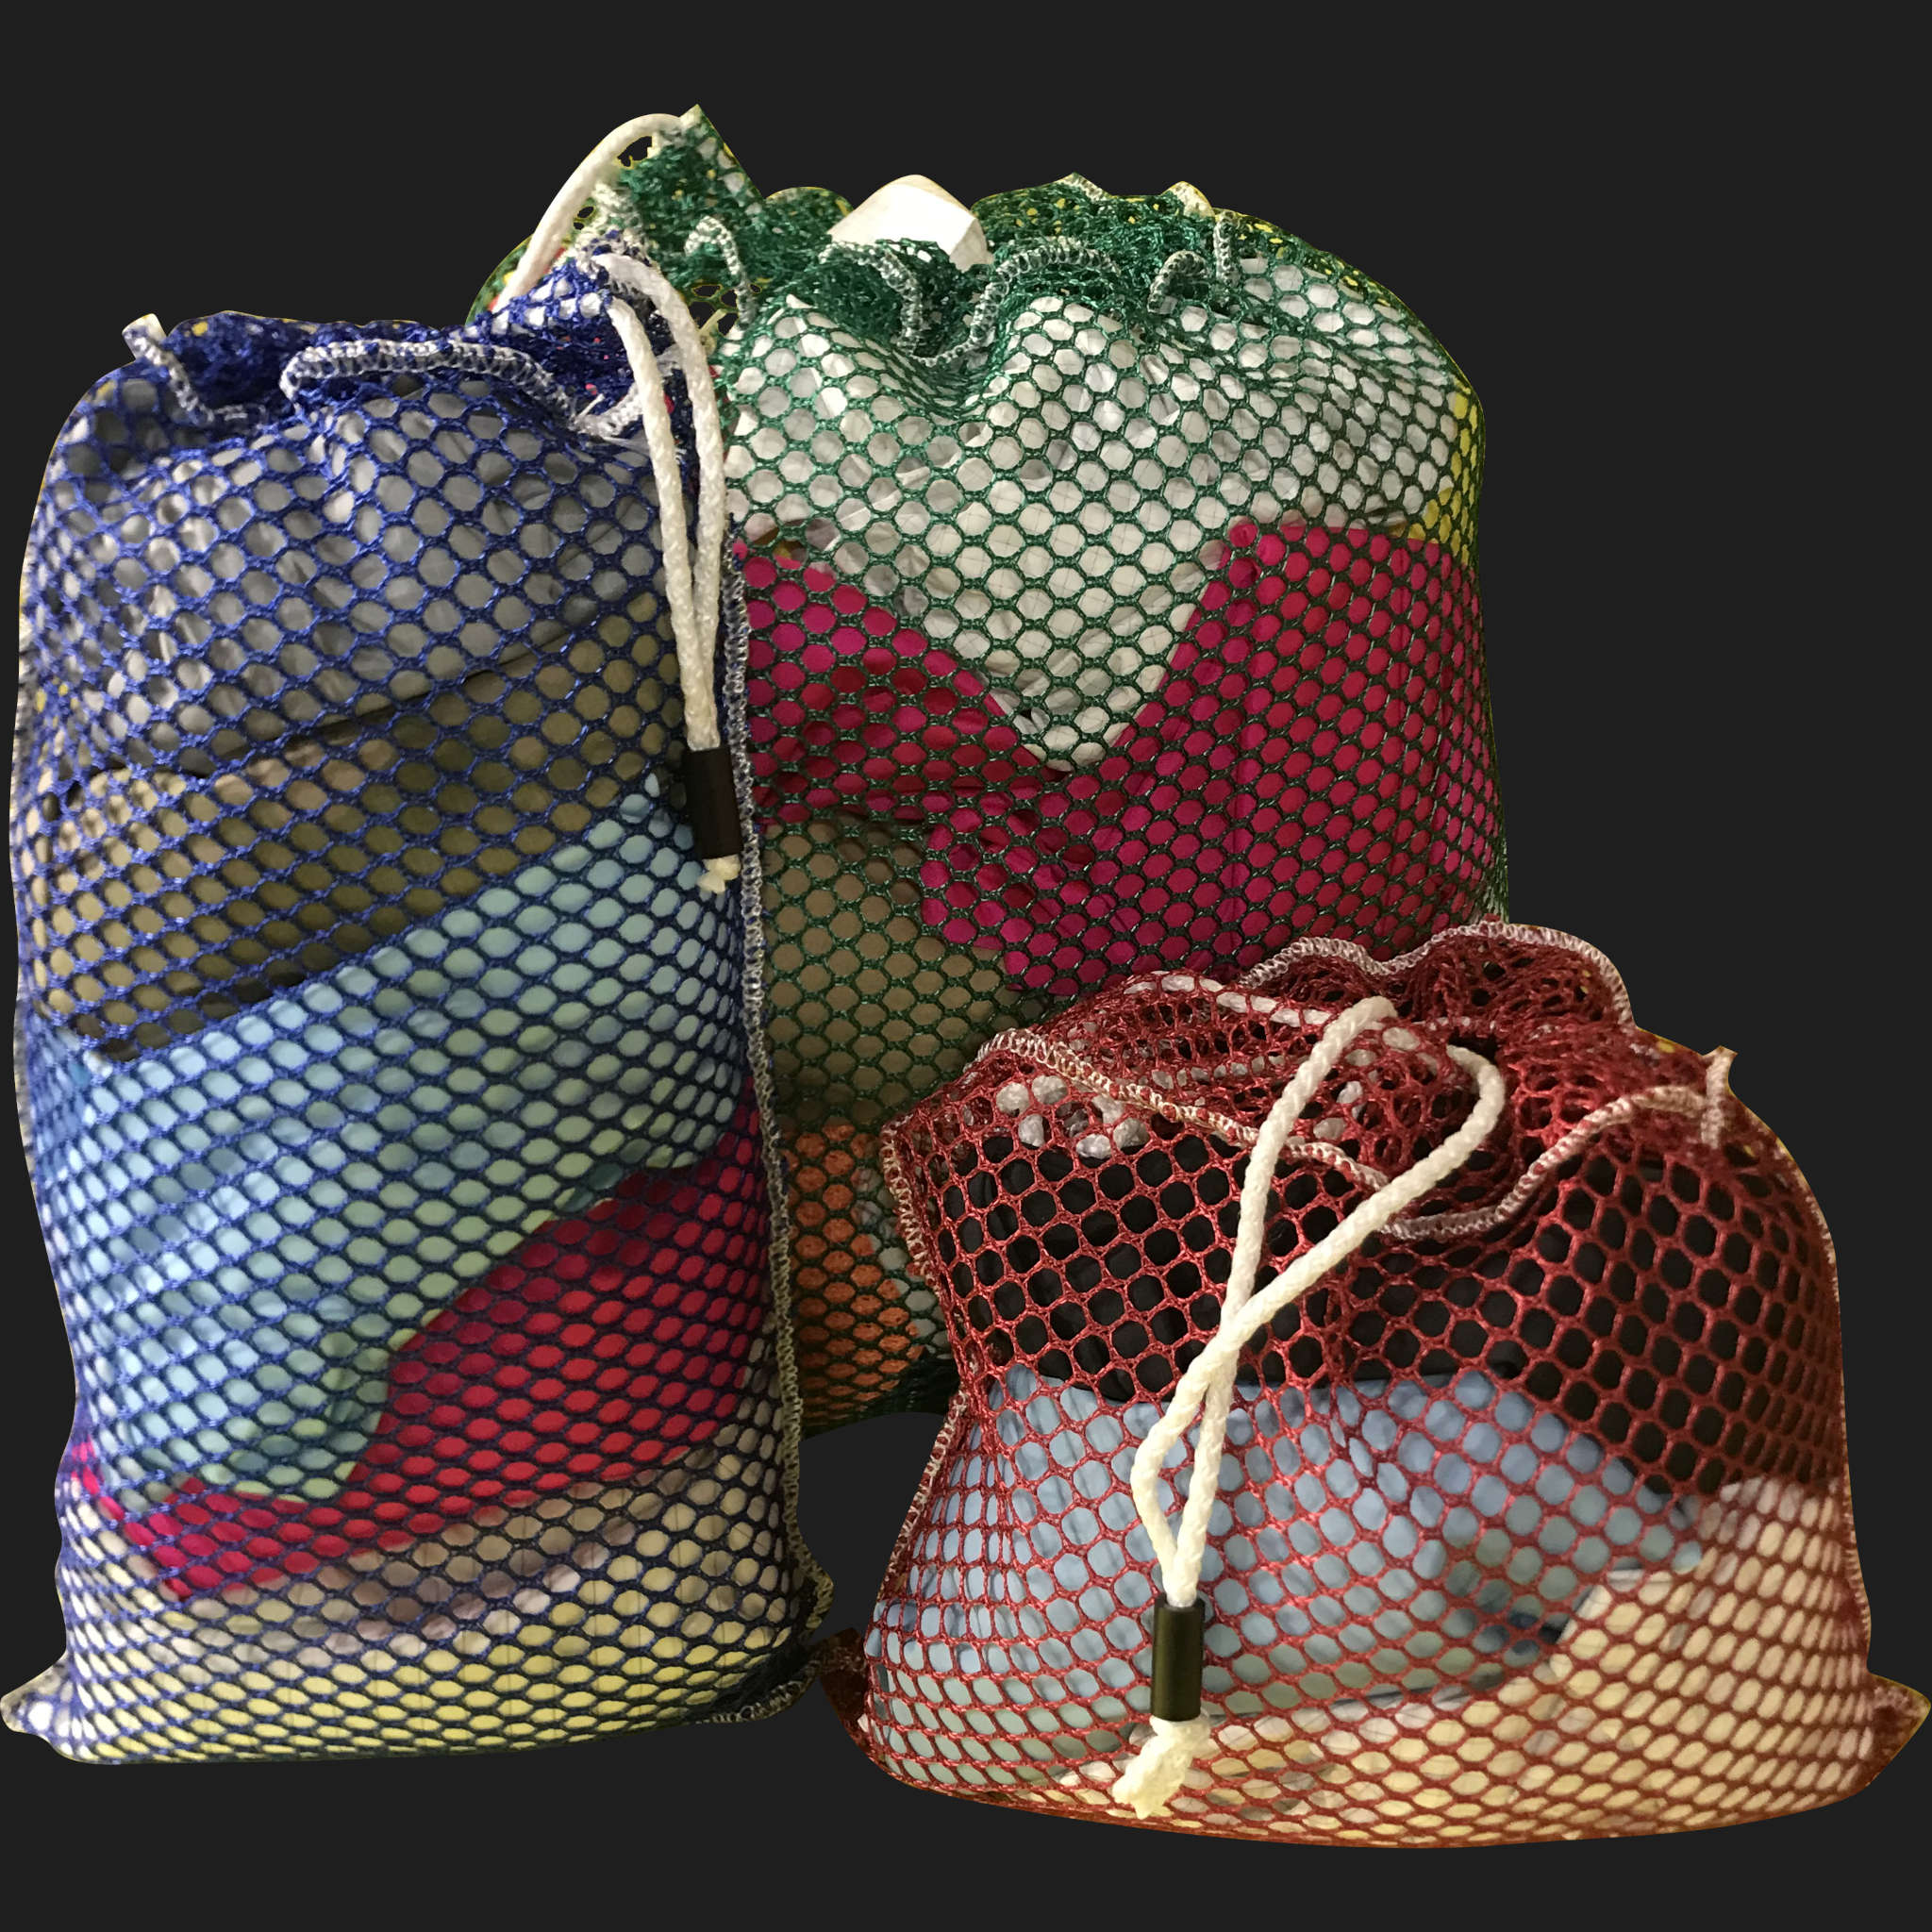 18" x 26" Customized Mesh-Net-Laundry Bags Heavy Duty with Cord and barrellock closure